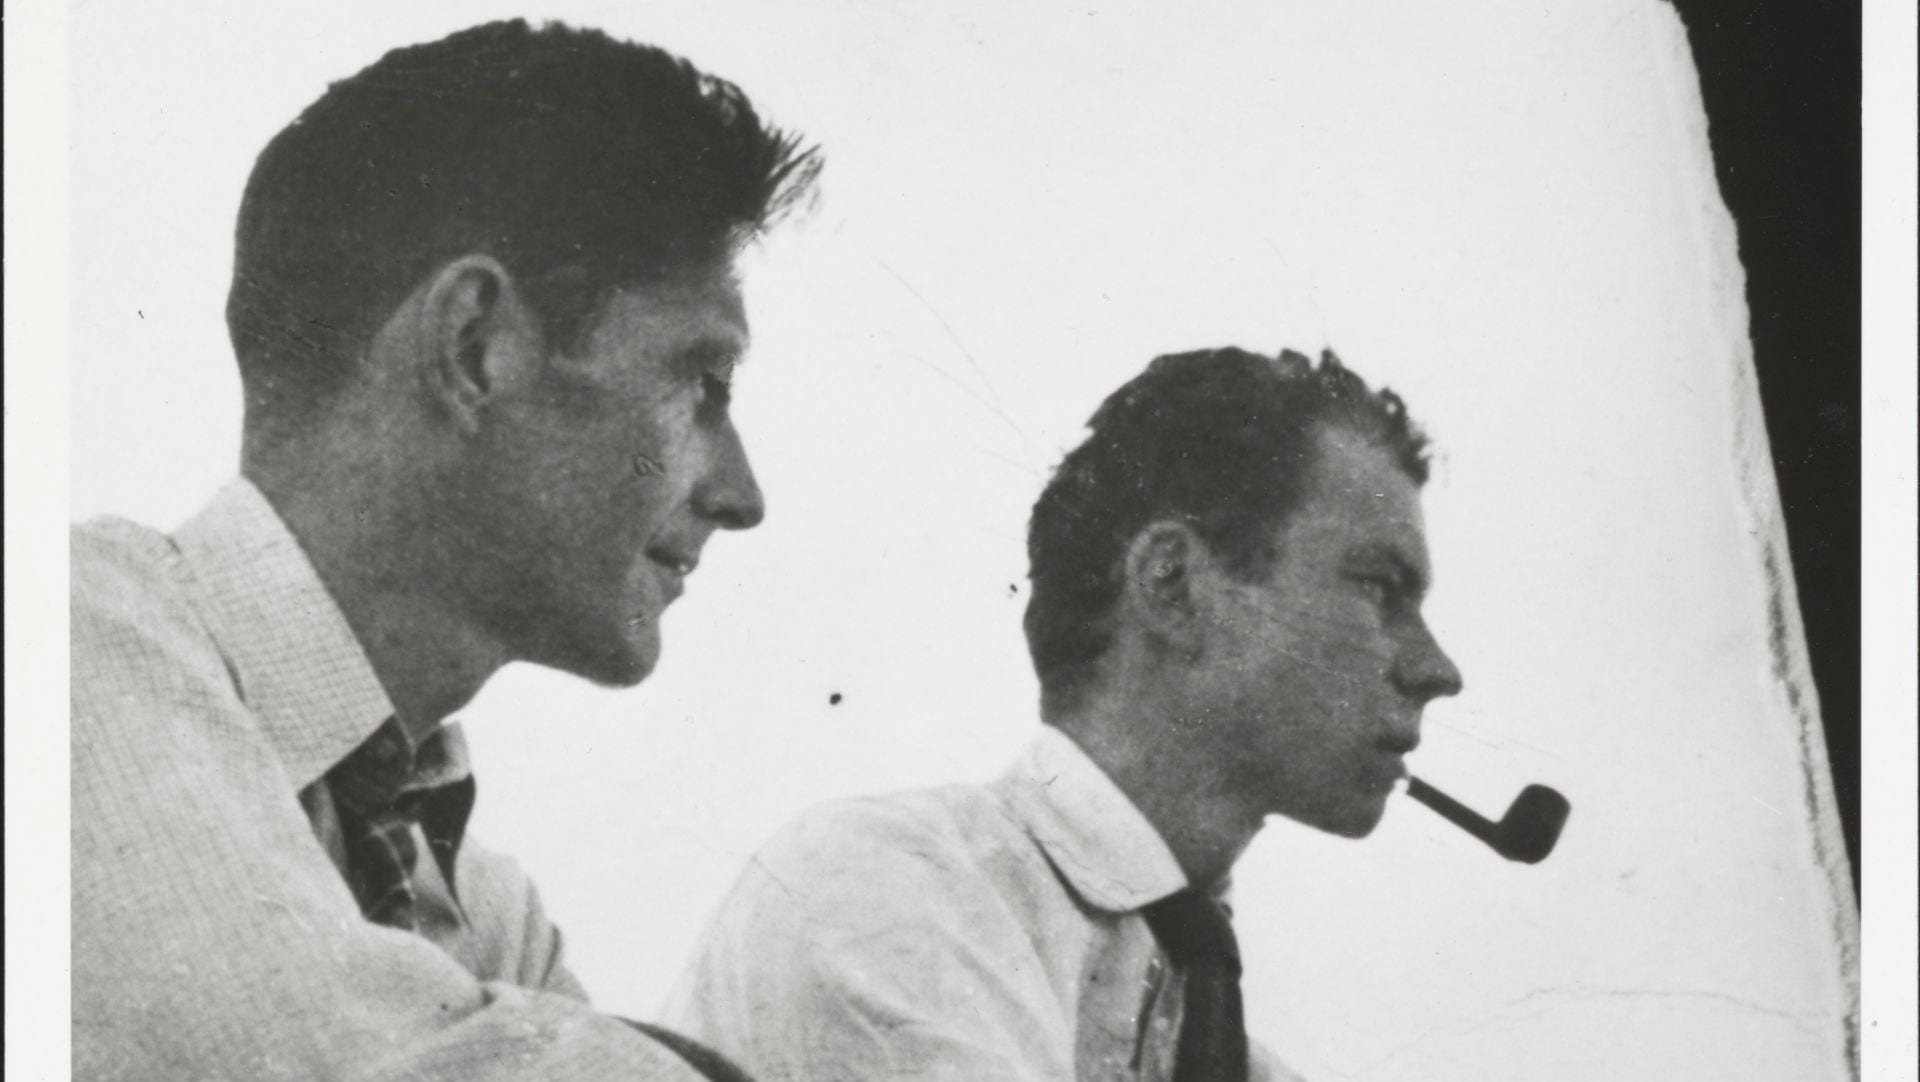 John Cage and Merce Cunningham, approximately 1945